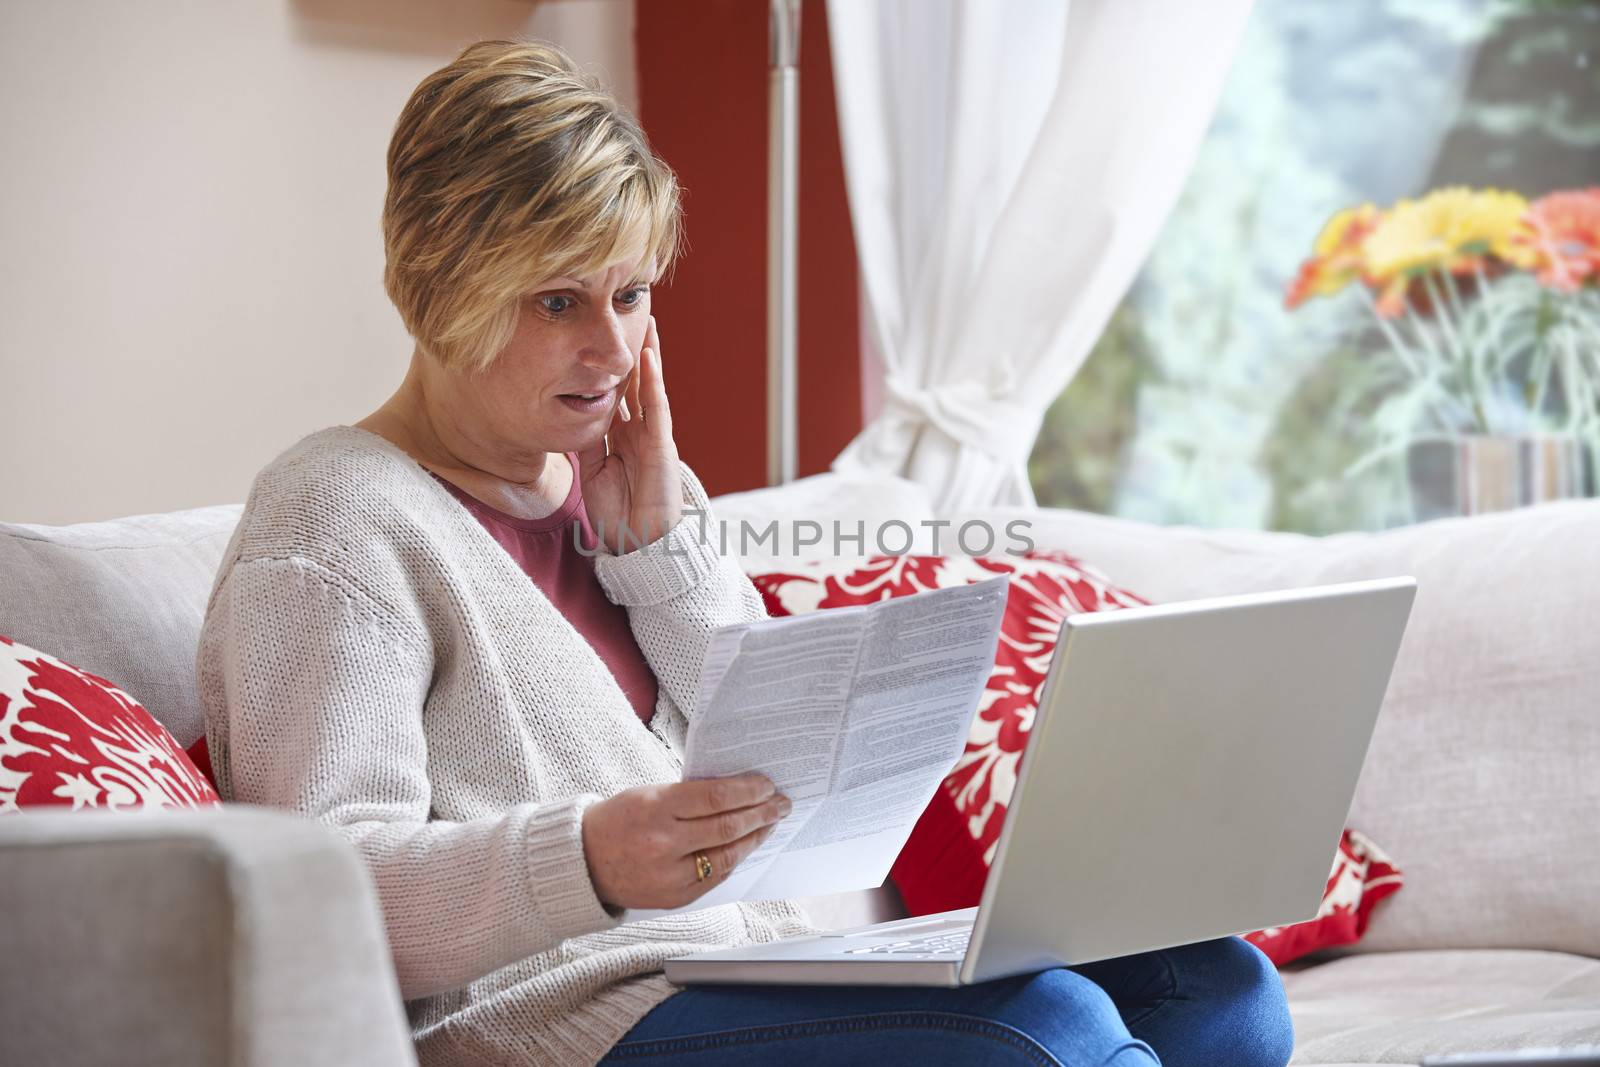 Woman on laptop by gemphotography